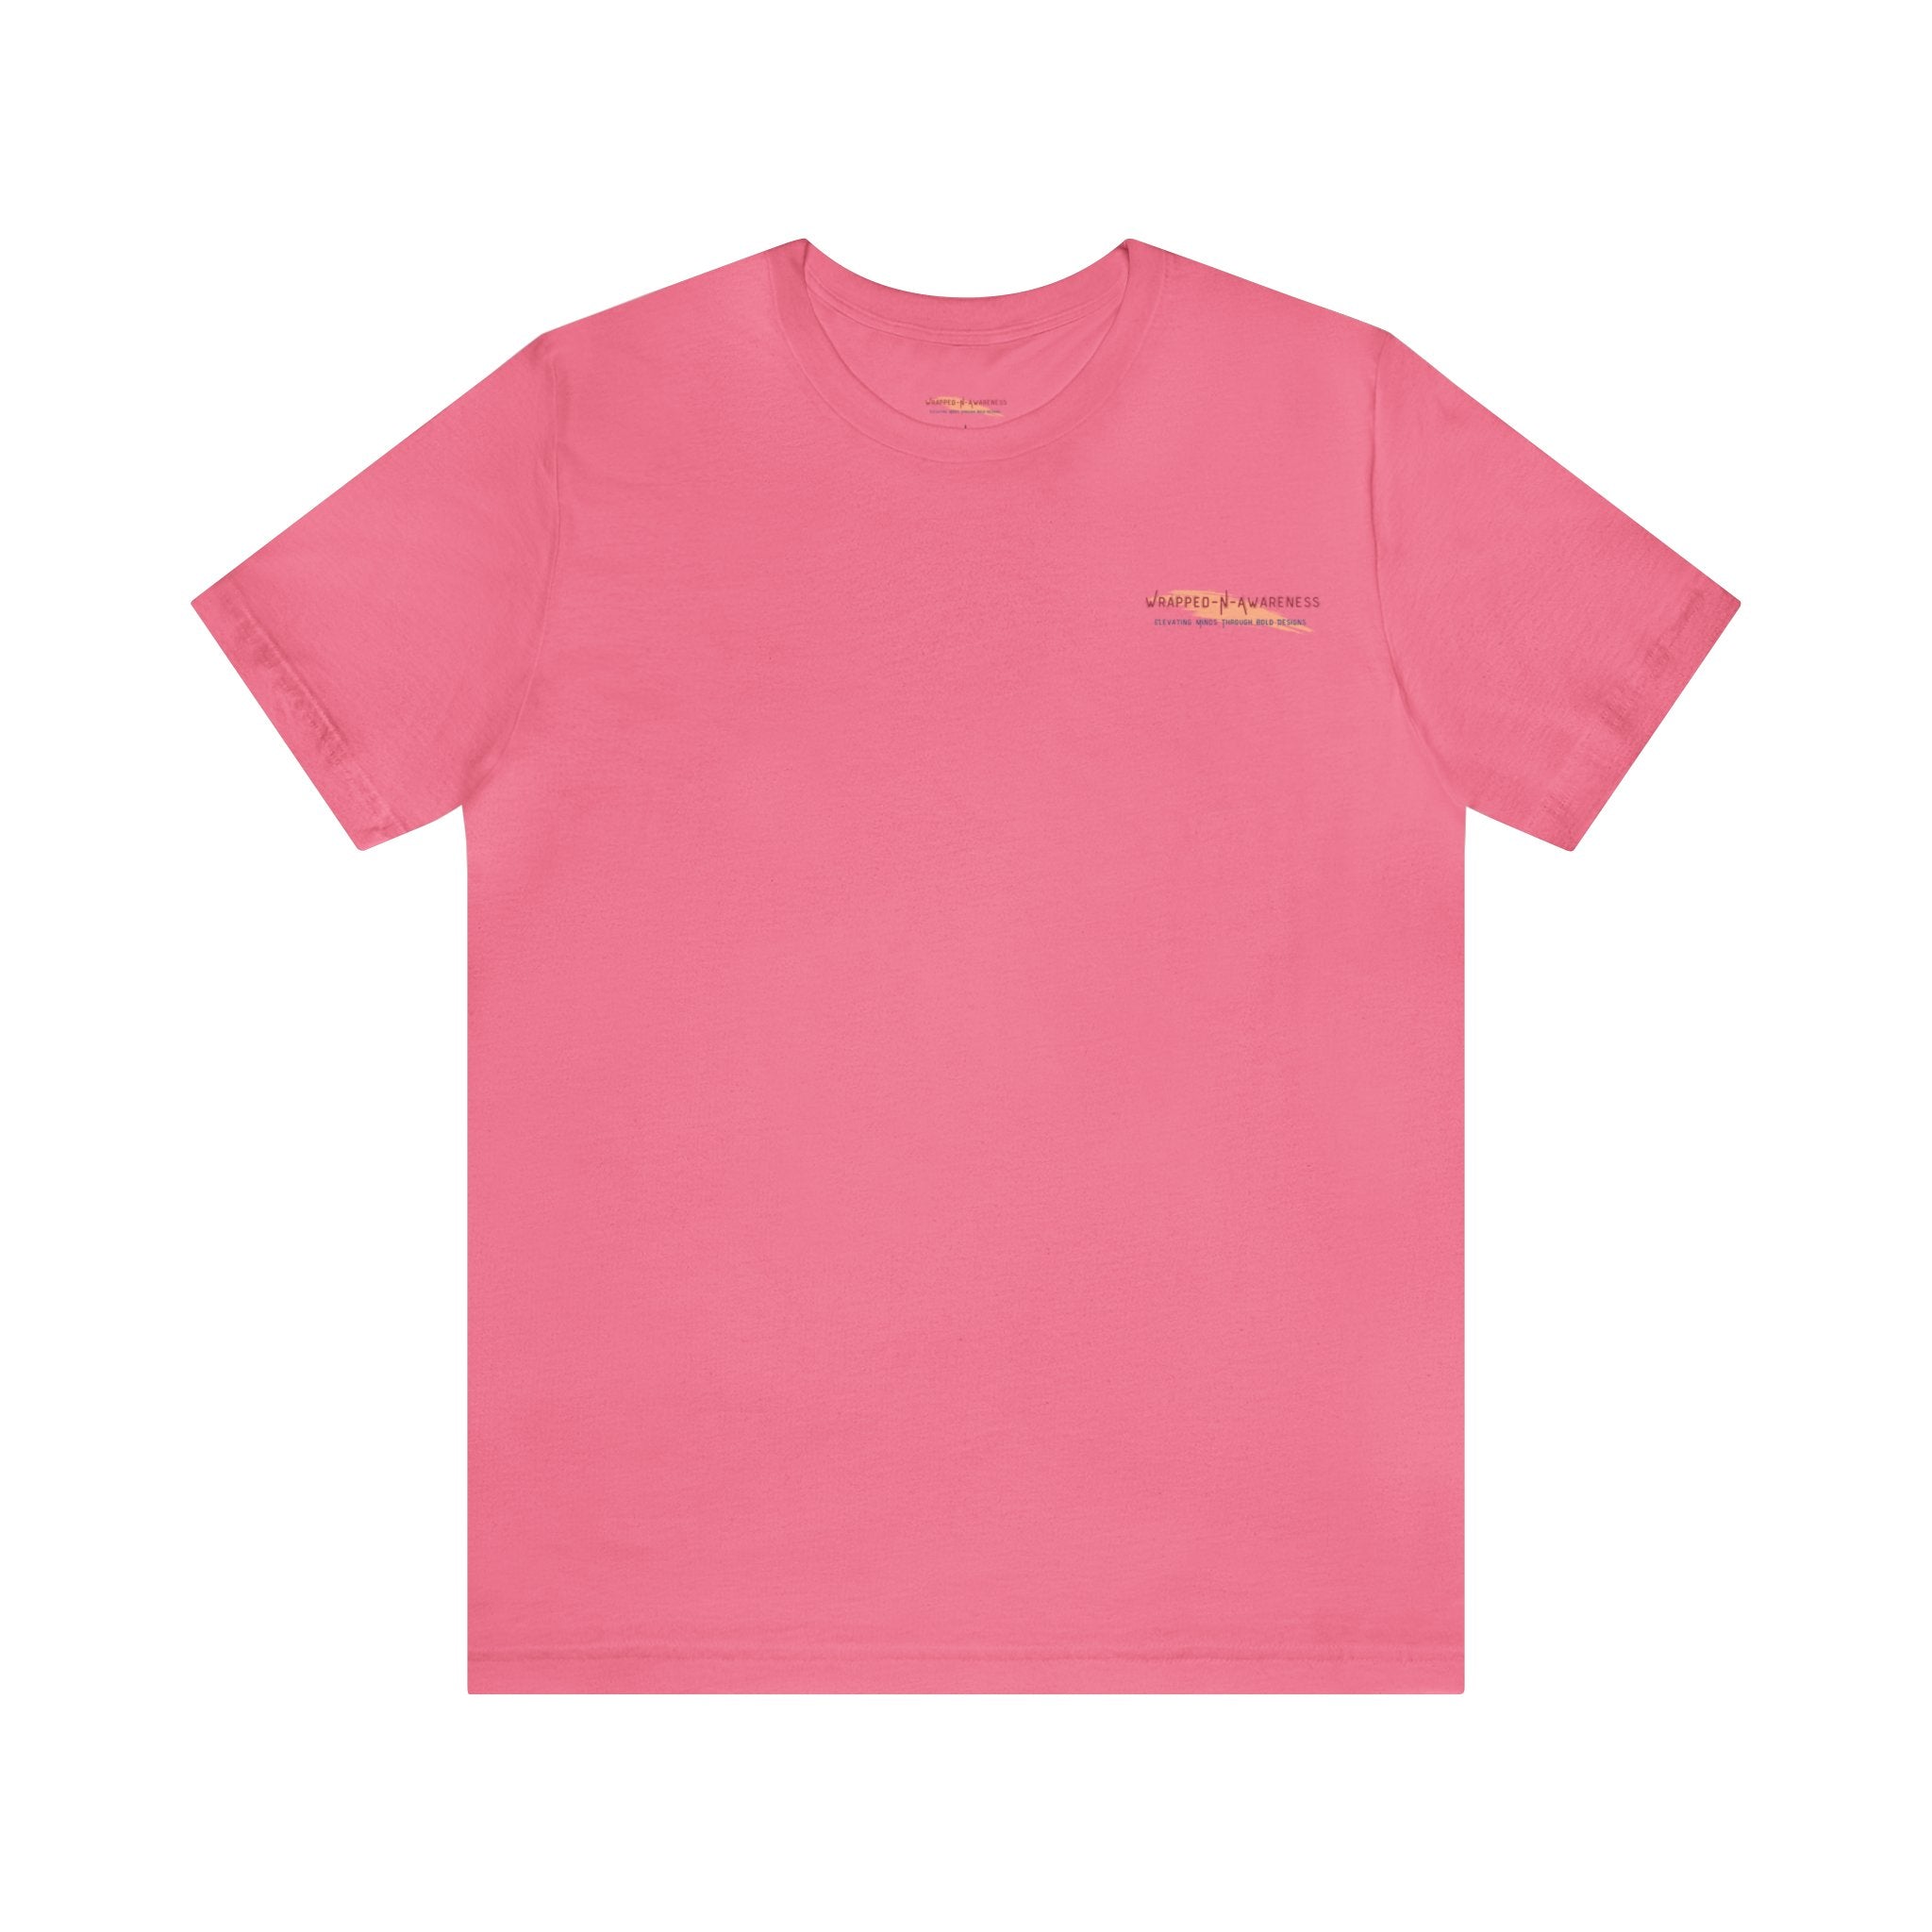 Brave Blossoms Jersey Tee - Bella+Canvas 3001 Charity Pink Classic Tee Comfortable Tee Cotton T-Shirt Graphic Tee JerseyTee Statement Shirt T-shirt Tee Unisex Apparel T-Shirt 4284684494925698615_2048 Printify